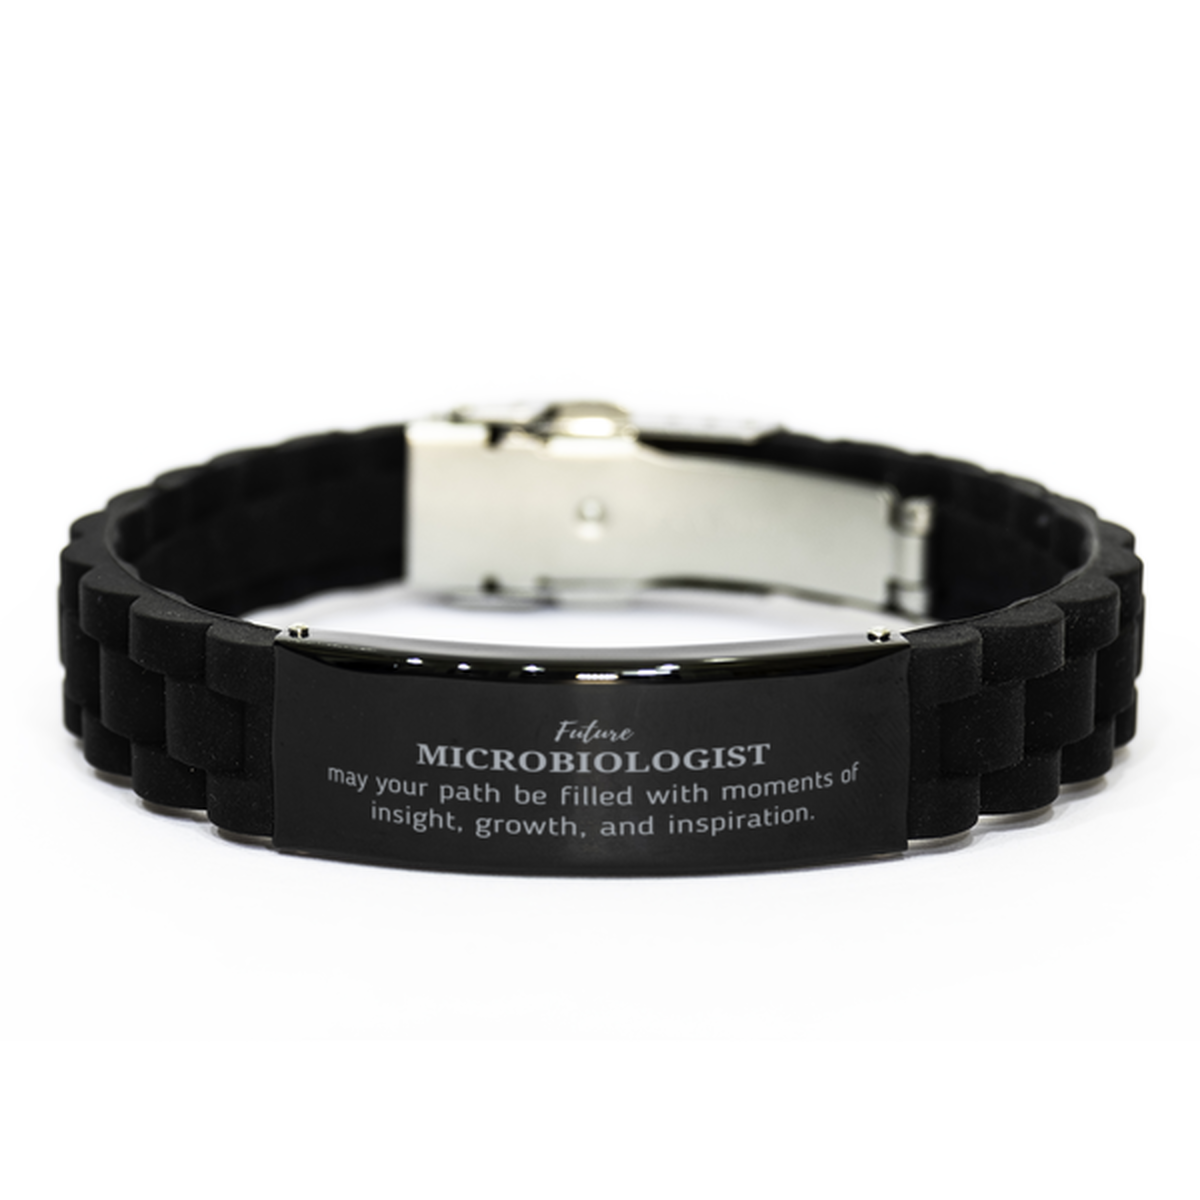 Future Microbiologist Gifts, May your path be filled with moments of insight, Graduation Gifts for New Microbiologist, Christmas Unique Black Glidelock Clasp Bracelet For Men, Women, Friends